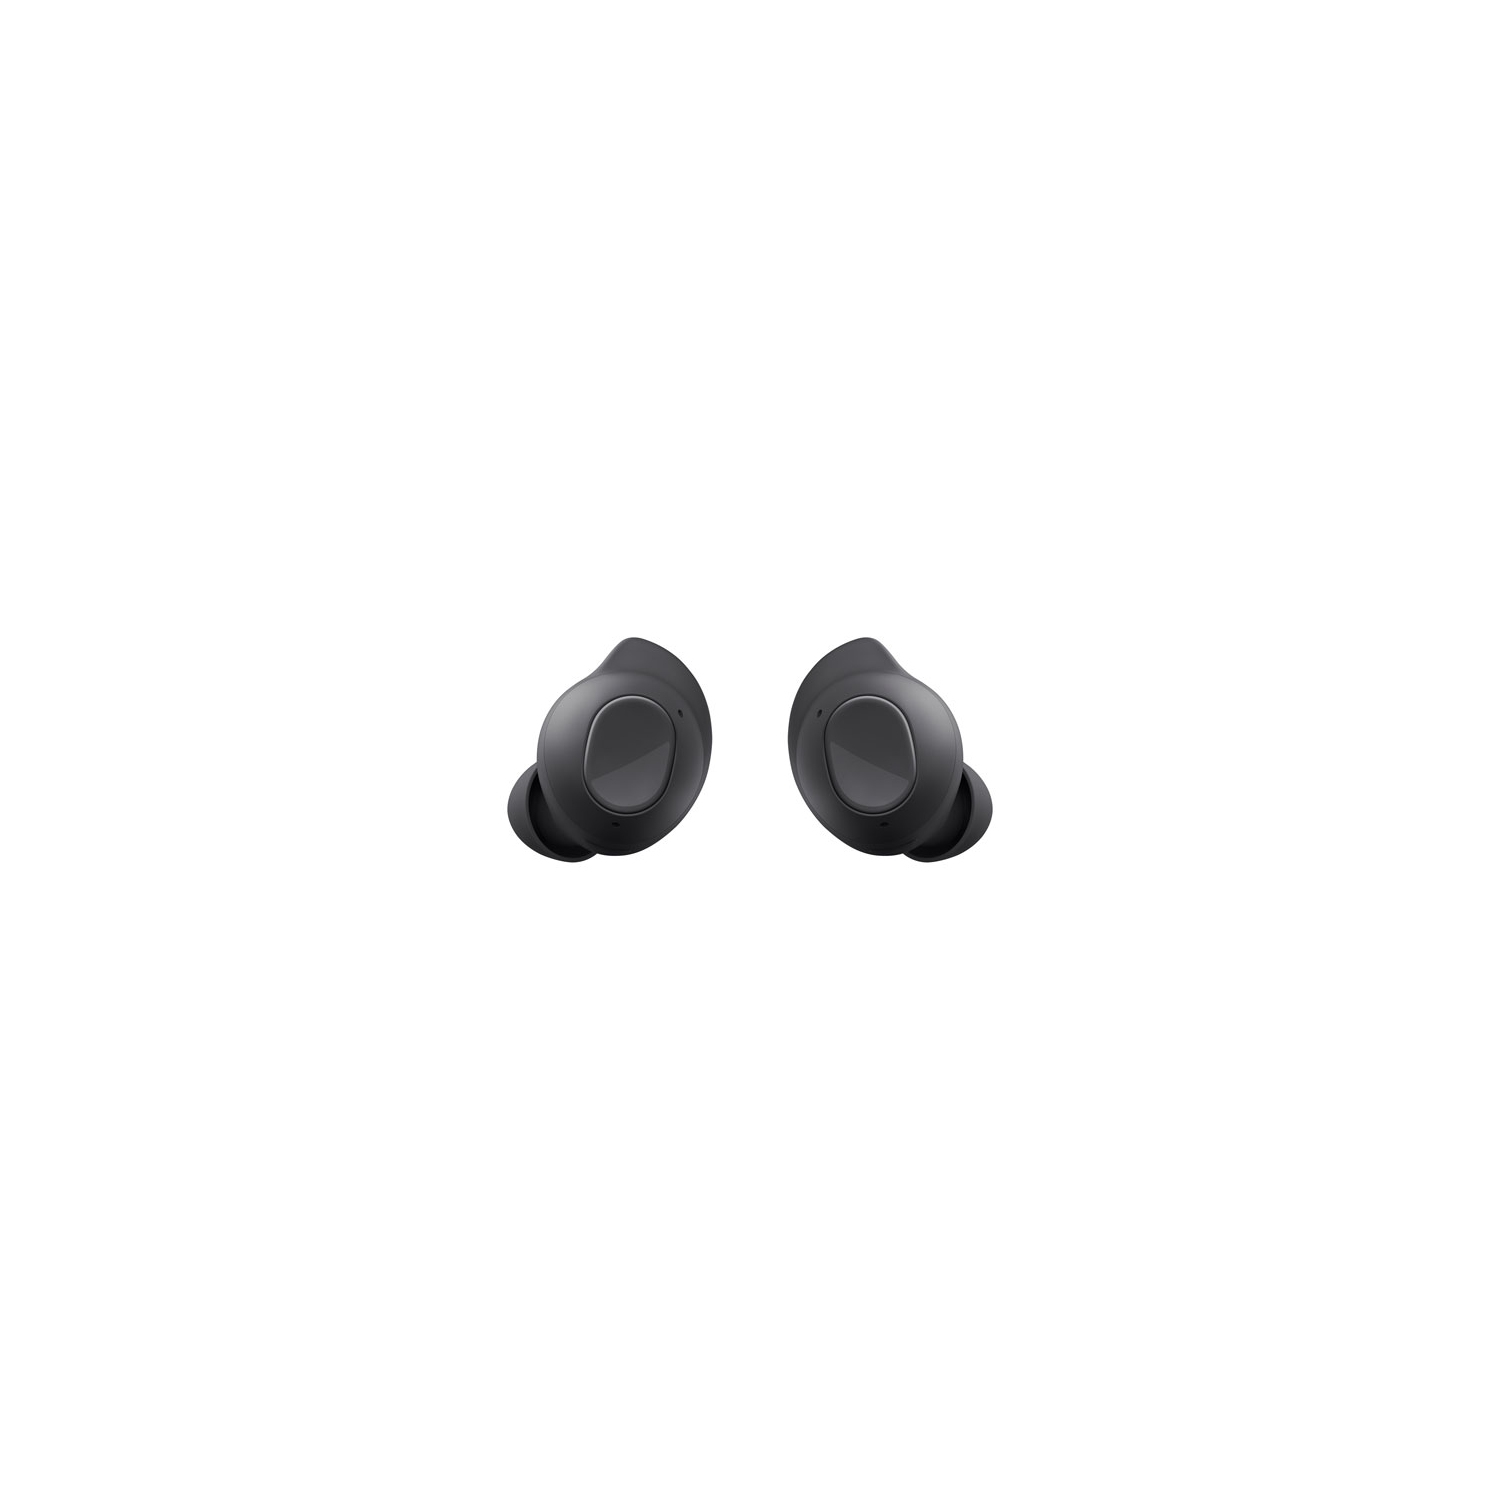 Refurbished (Good) - Samsung Galaxy Buds FE IE Noise Cancelling True Wireless Earbuds - Graphite